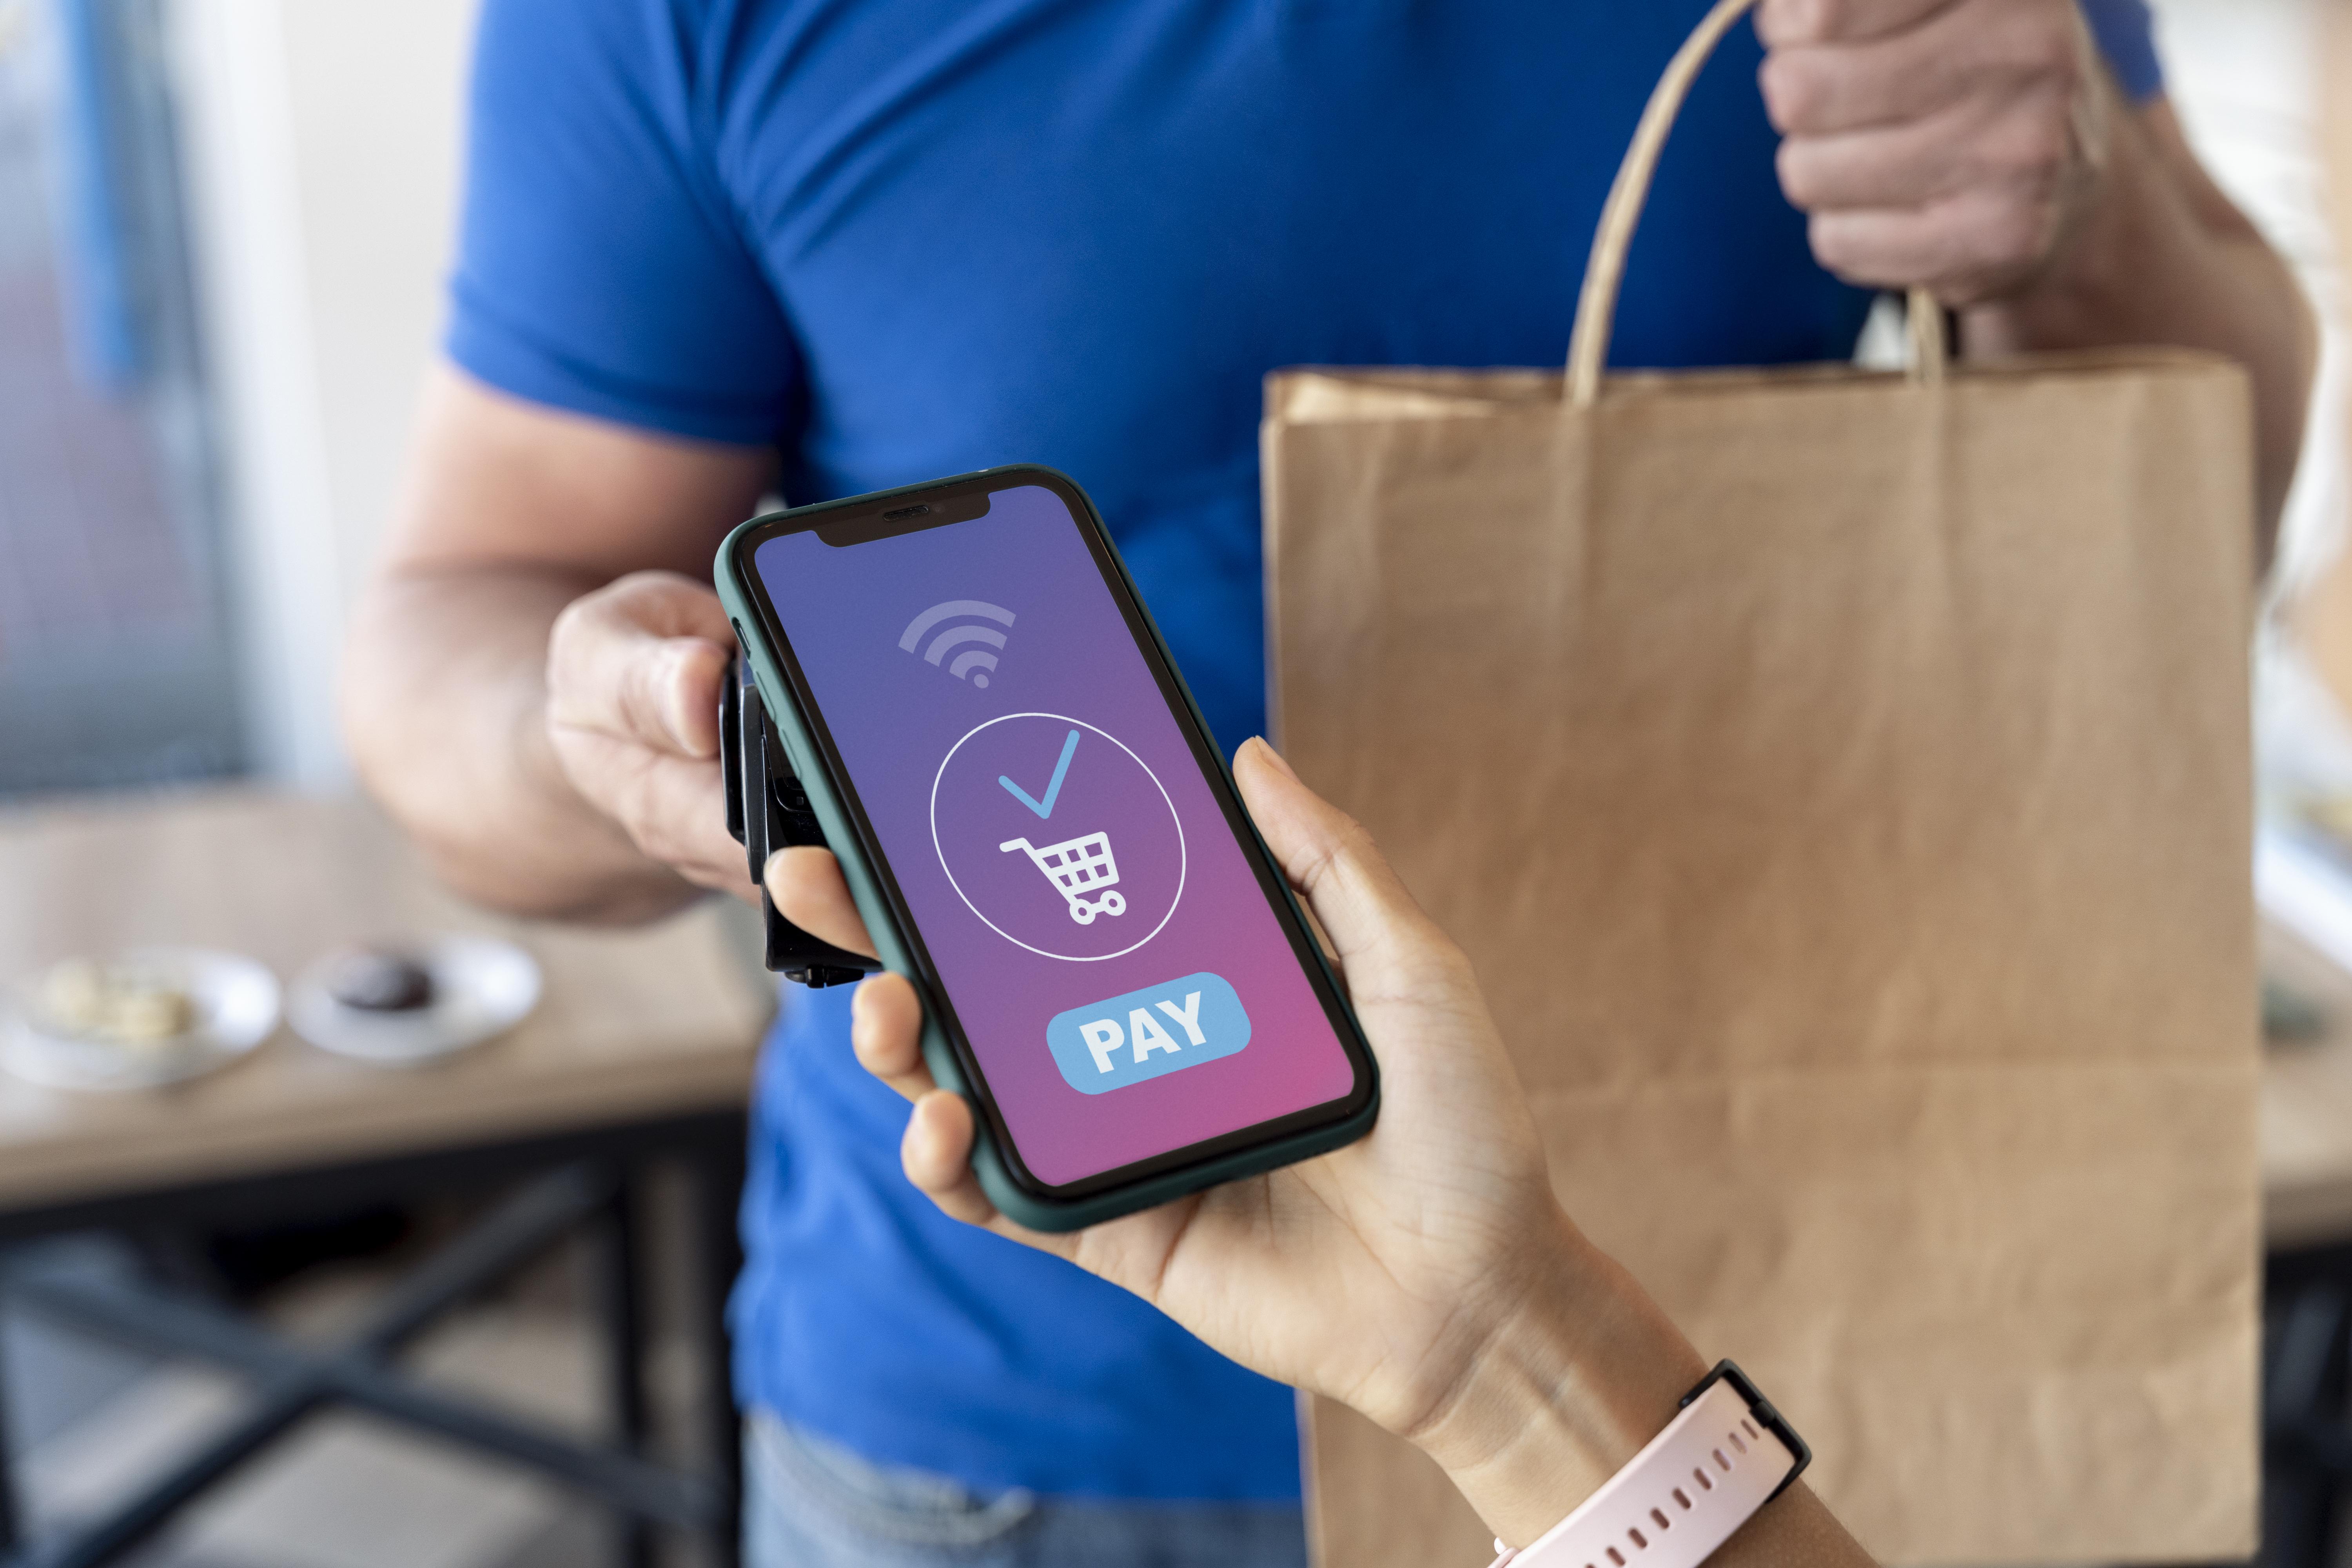 Mobile payment in UAE expected to post strong growth over the next five years